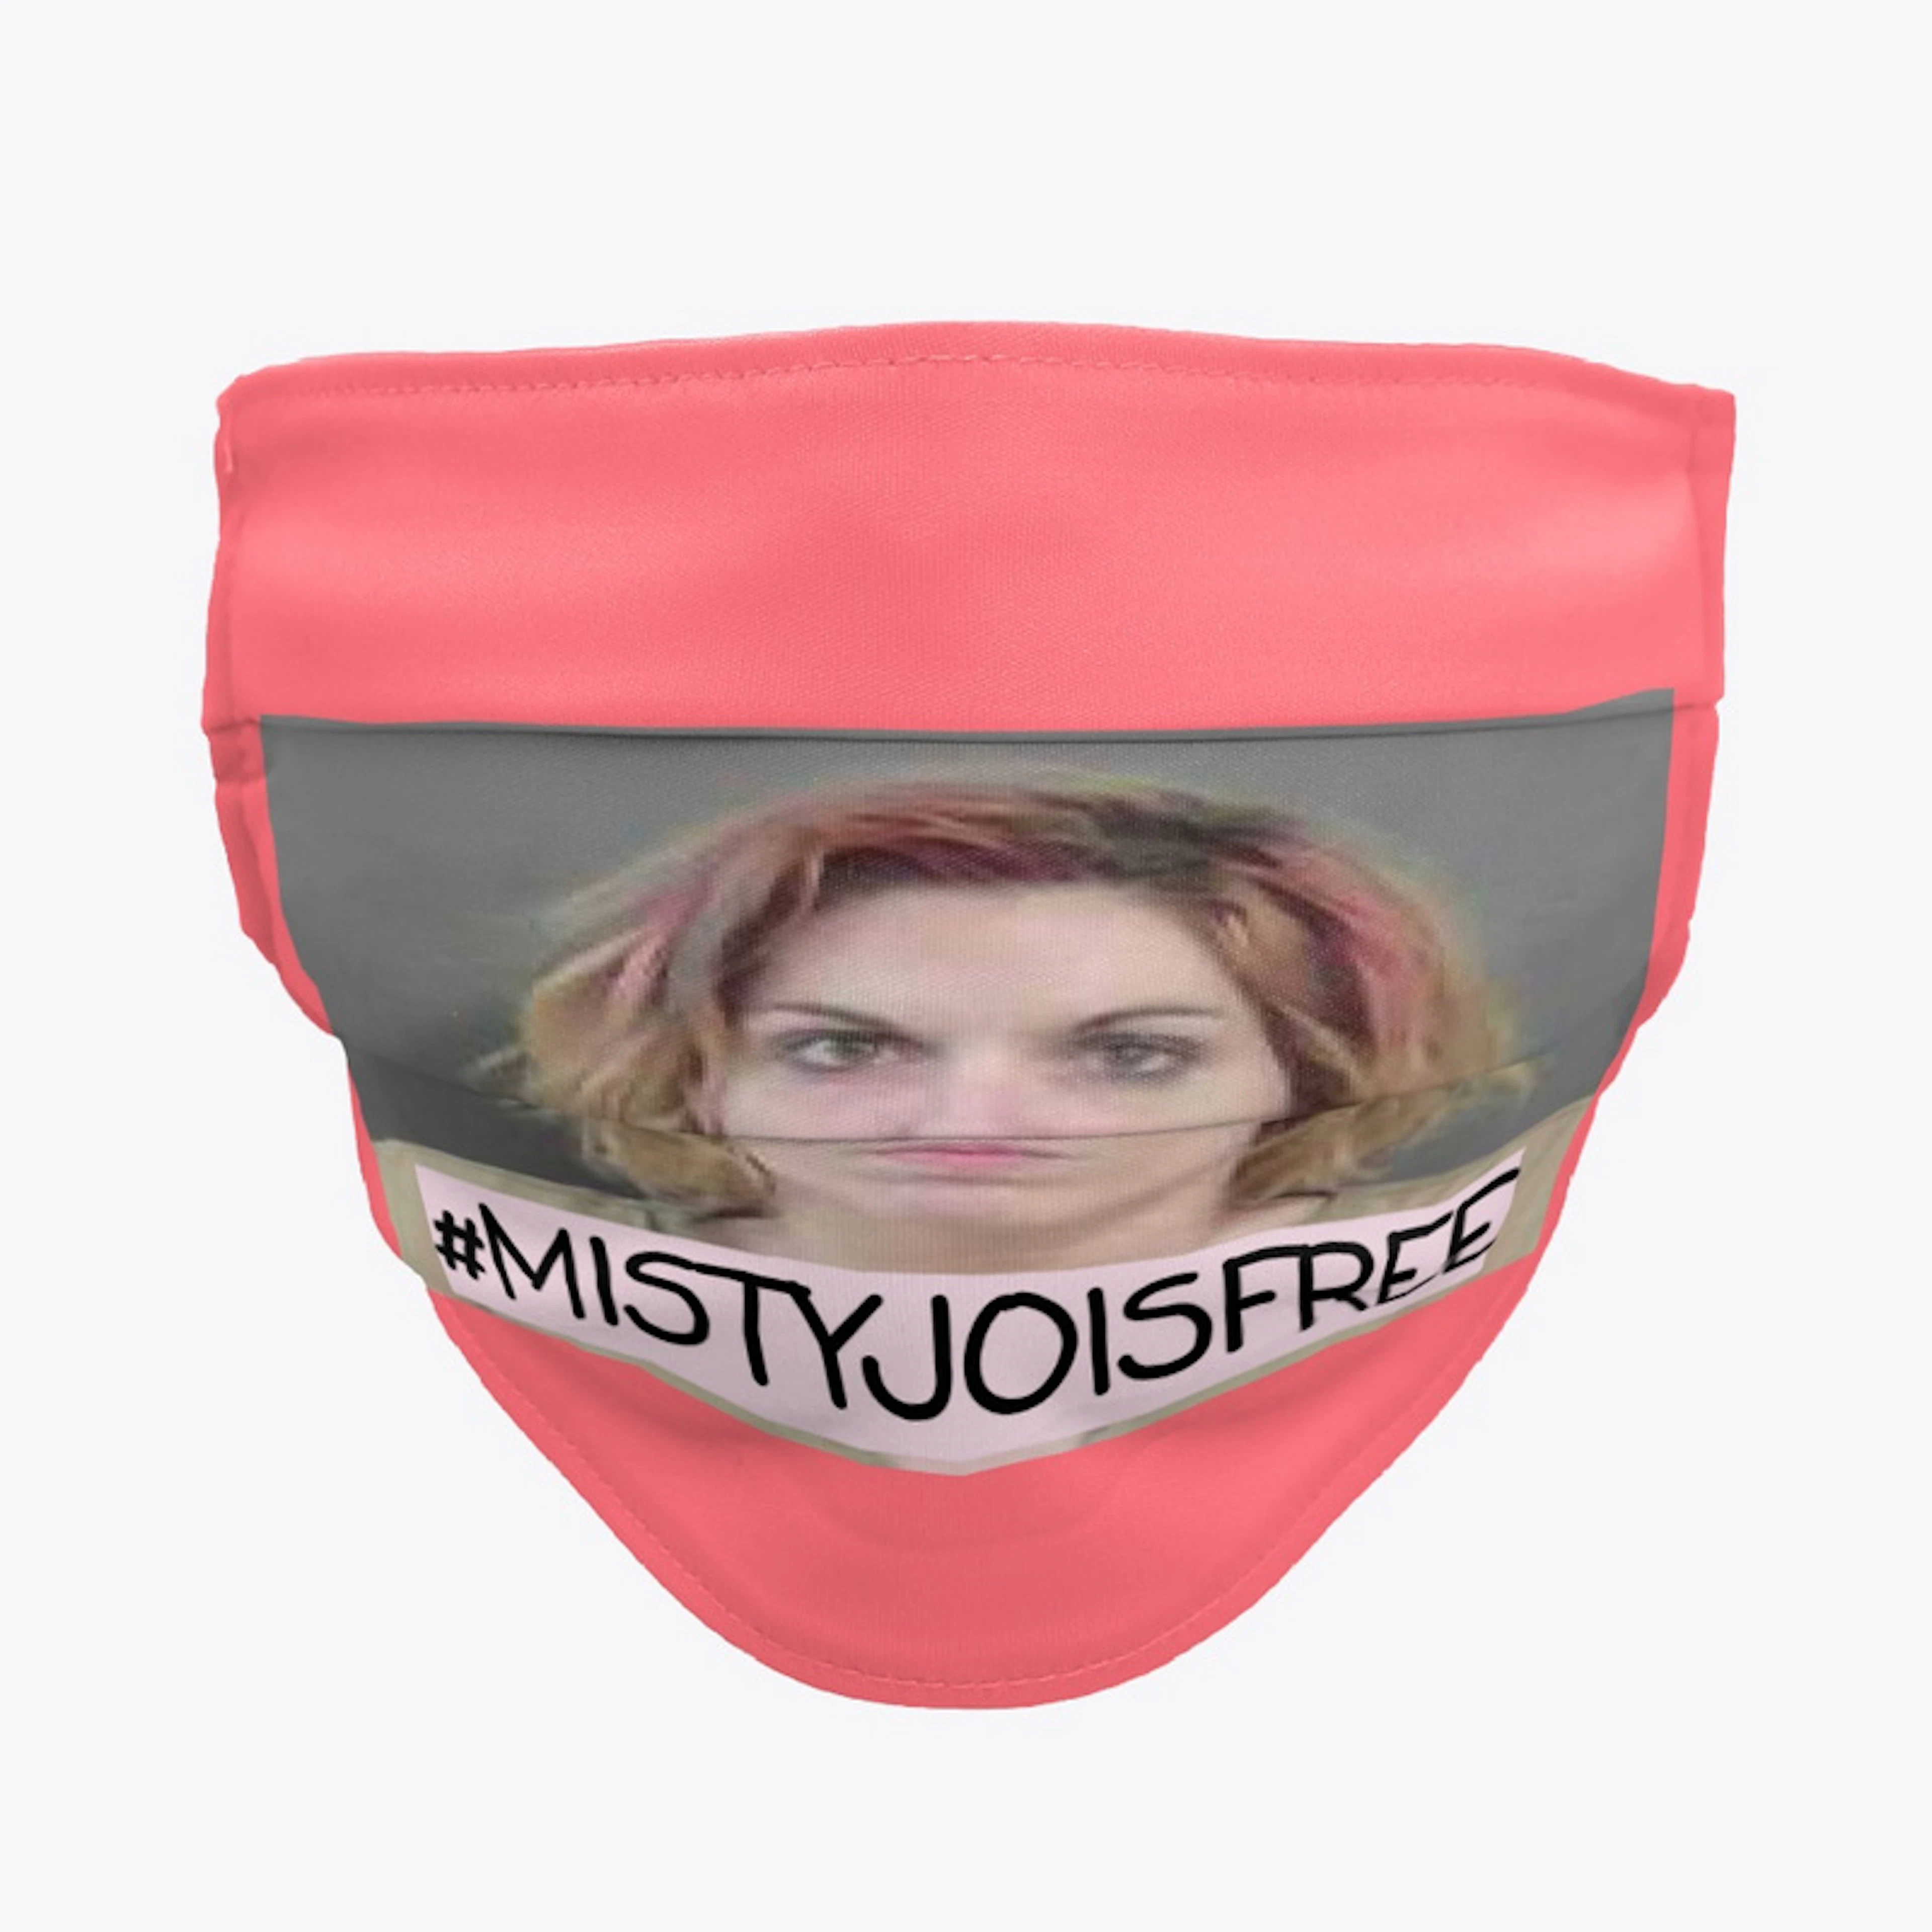 Misty Jo Is Free (1st Collection)